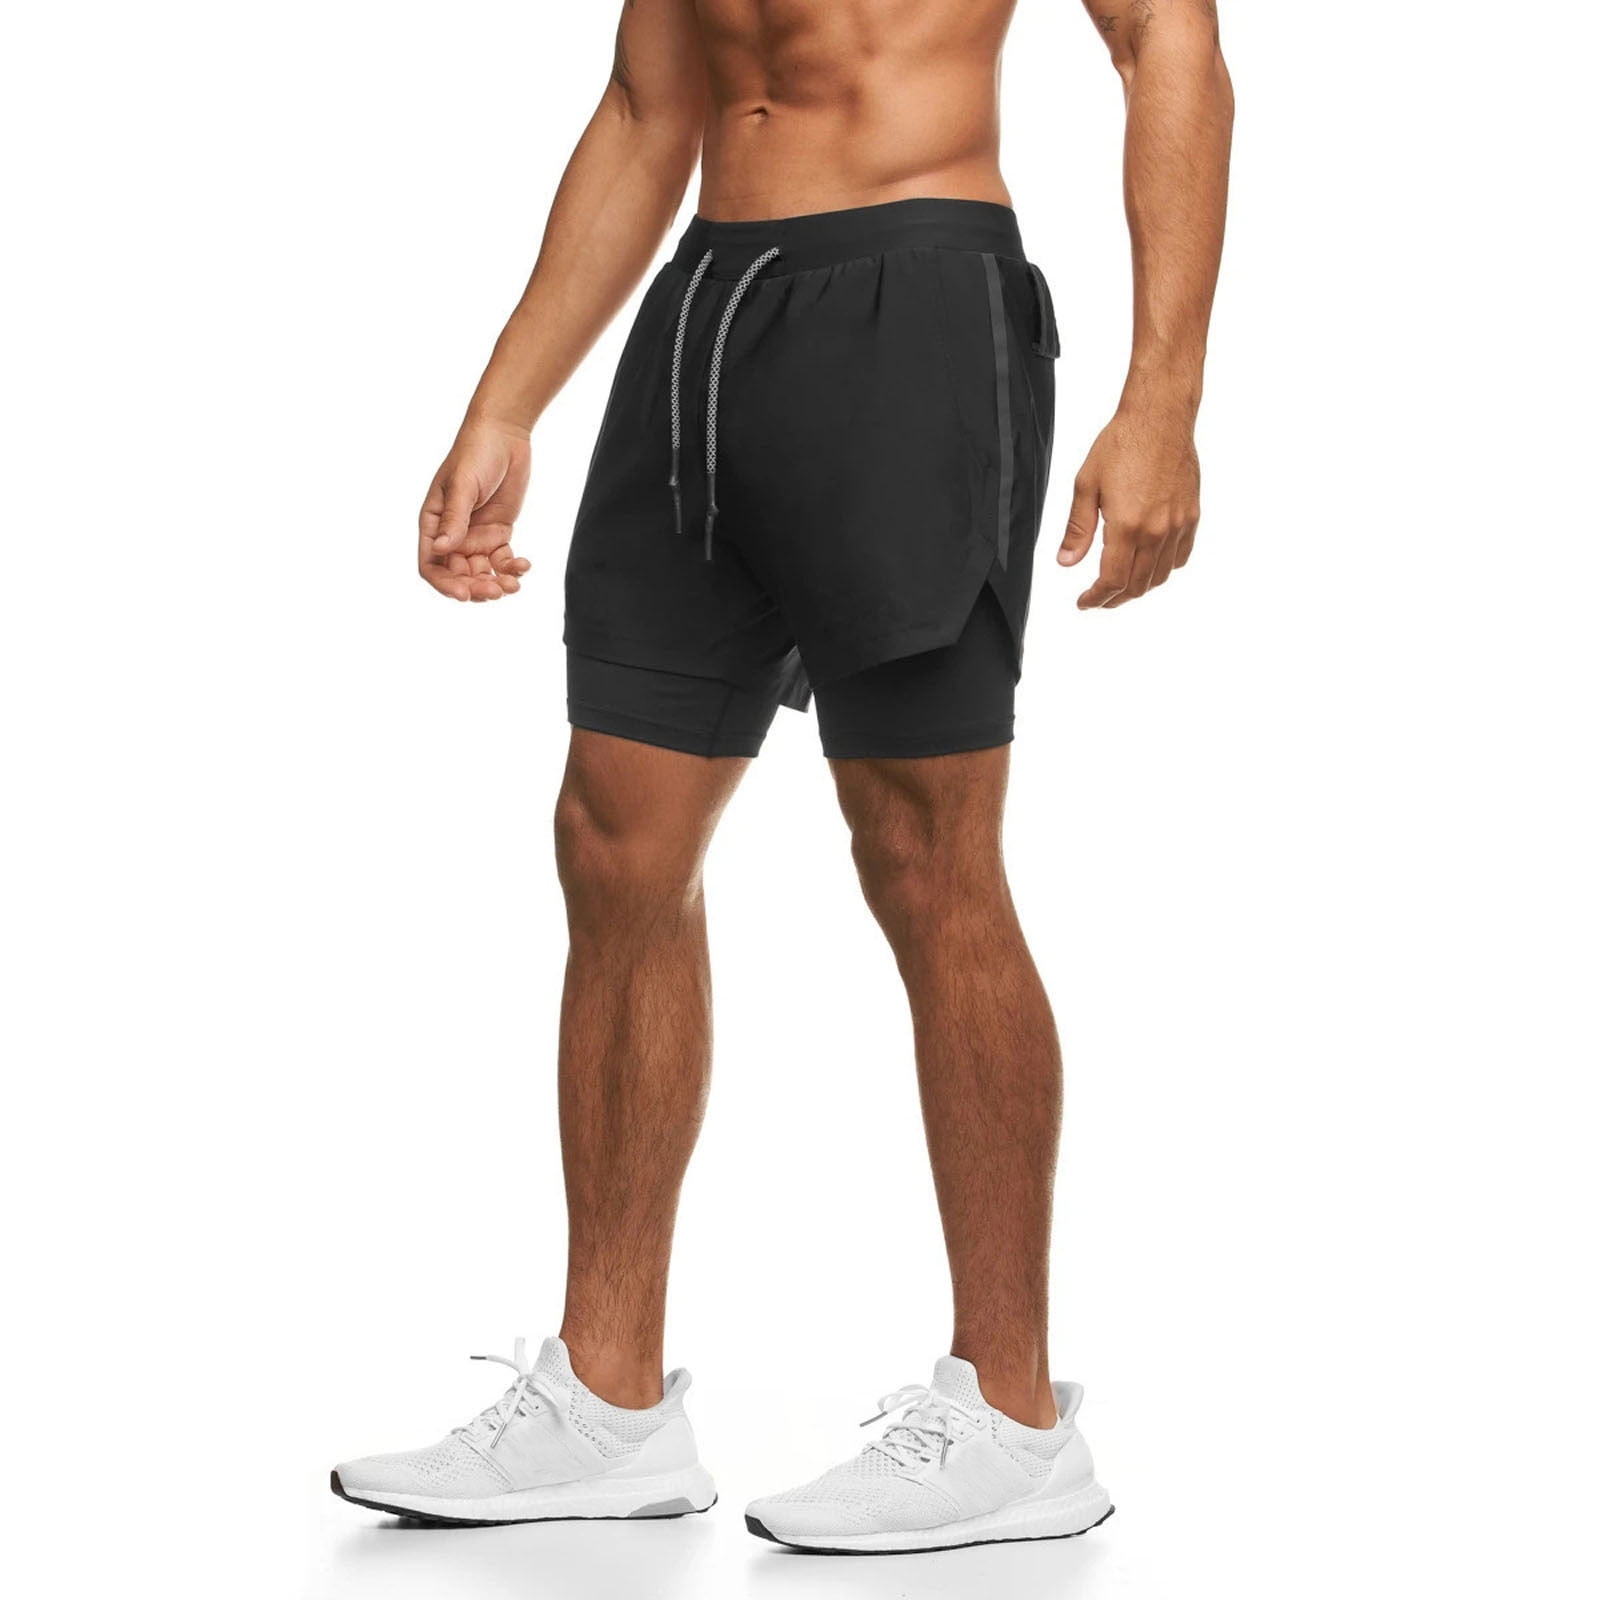 Men's 2 in 1 Workout Running Shorts Casual Quick Dry Lightweight ...